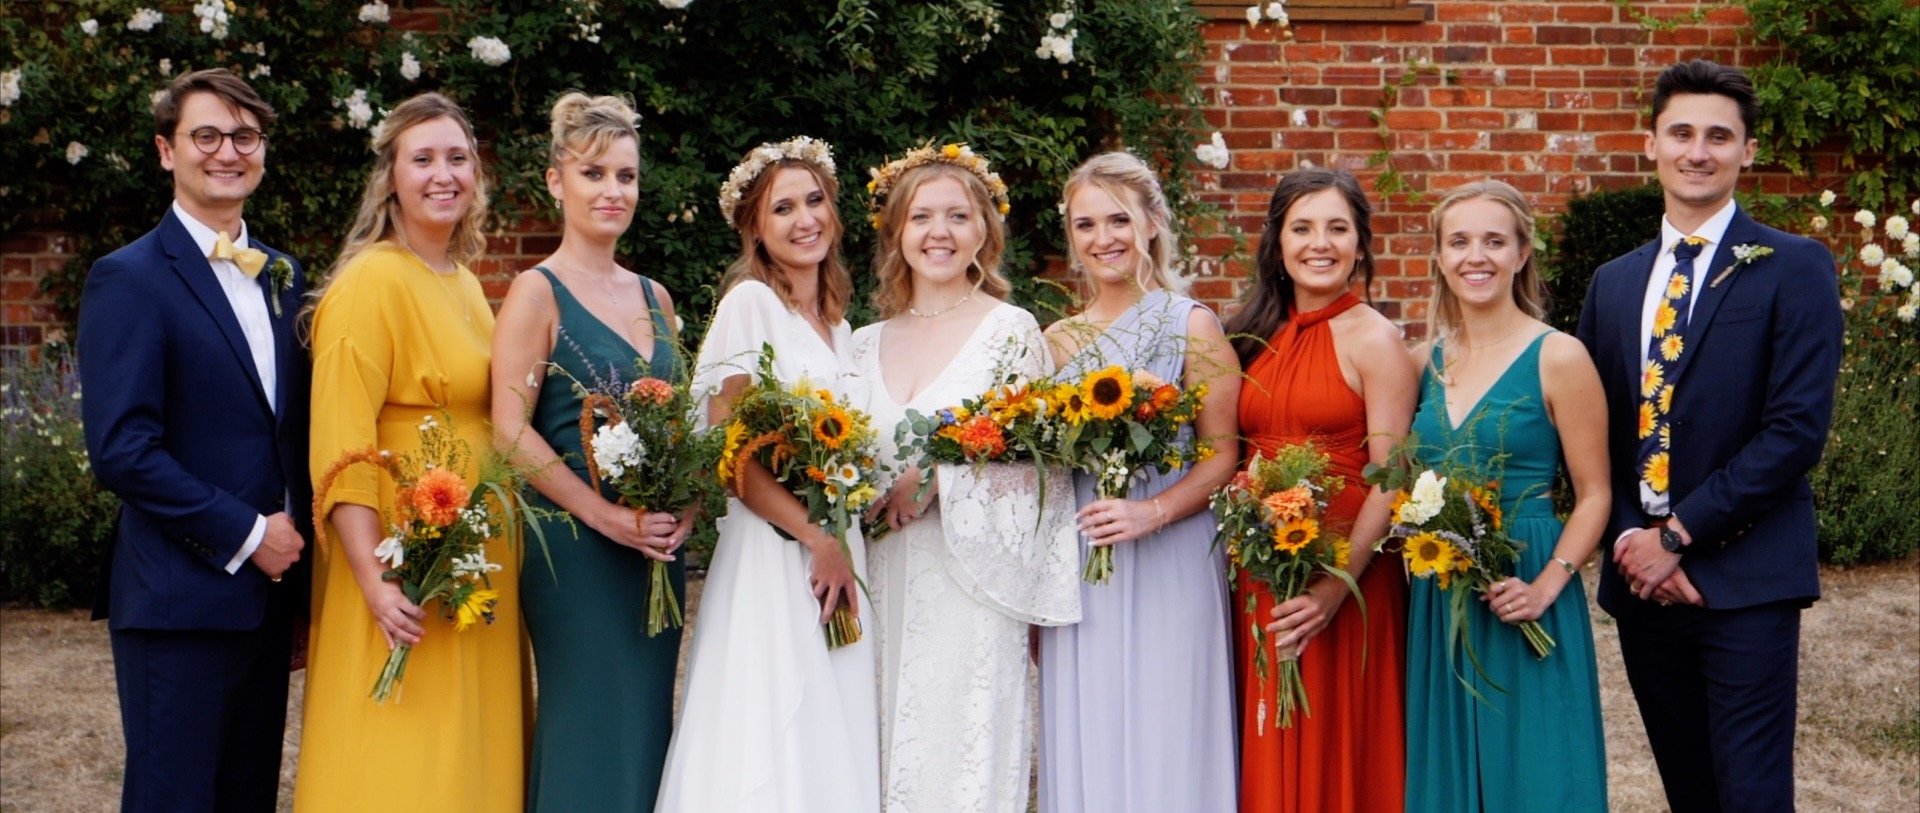 The wedding party at Apton Hall videos by 3 cheers media.jpg